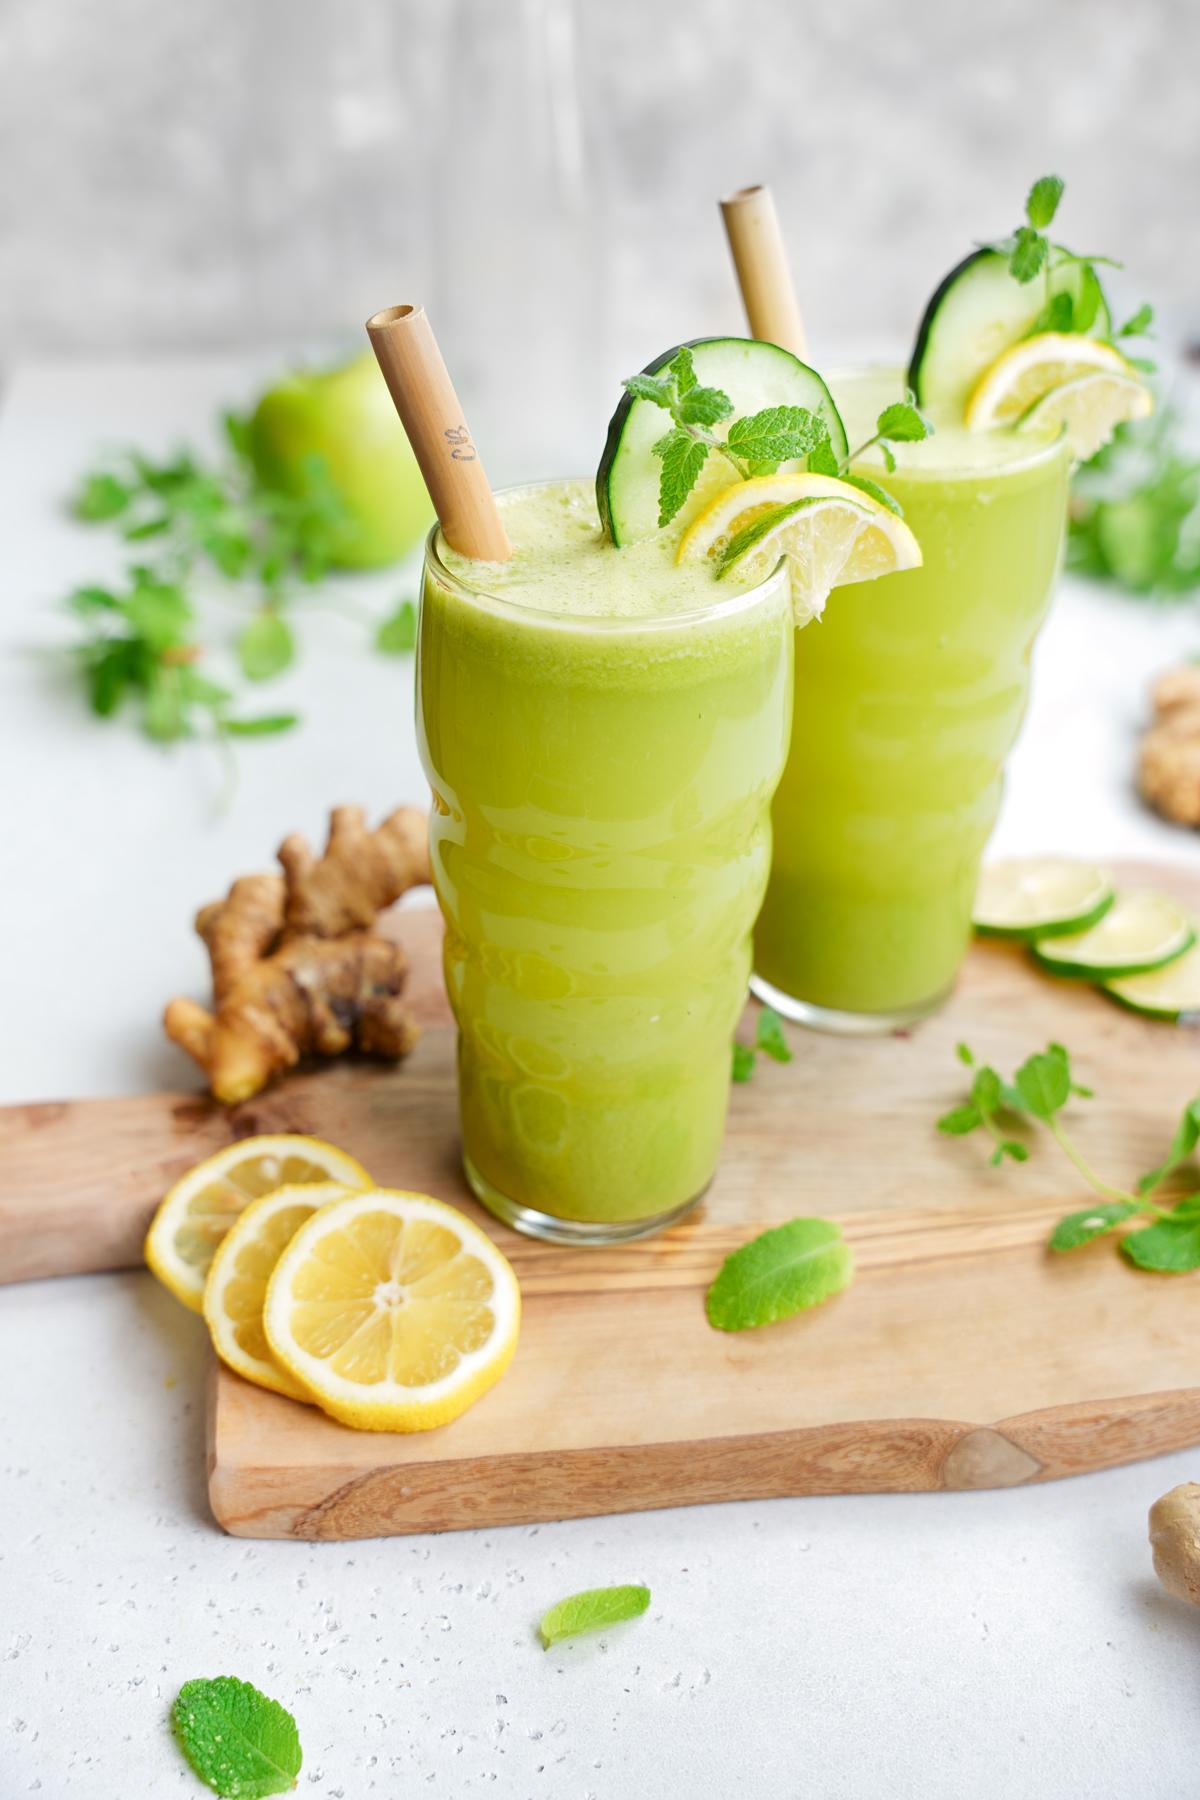 the glasses with ginger, mint, lemon, and limes surrounding it